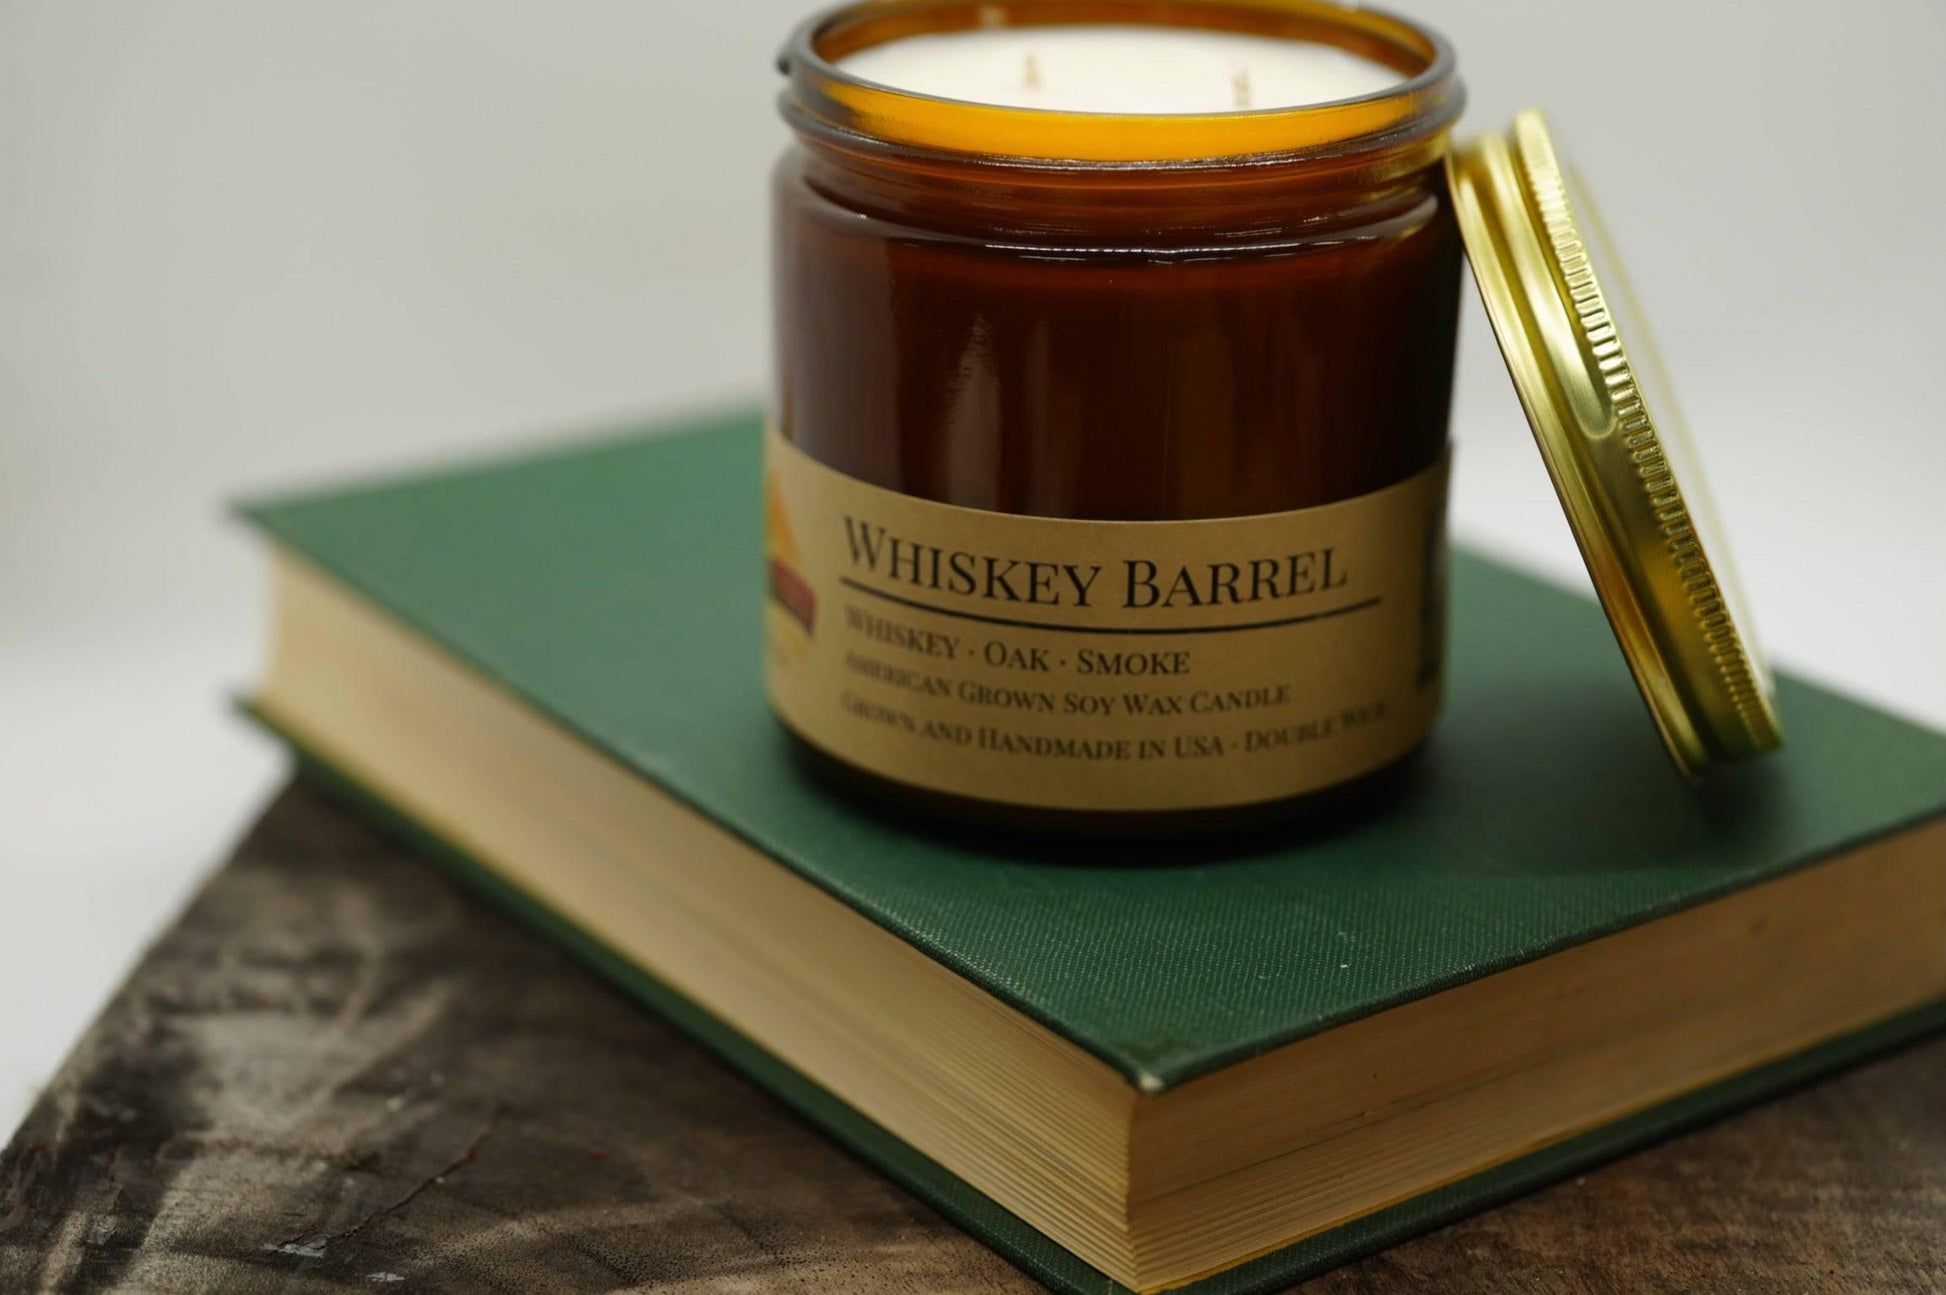 Whiskey Barrel Soy Wax Candle | 16 oz Double Wick Amber Apothecary Jar - Prairie Fire Candles